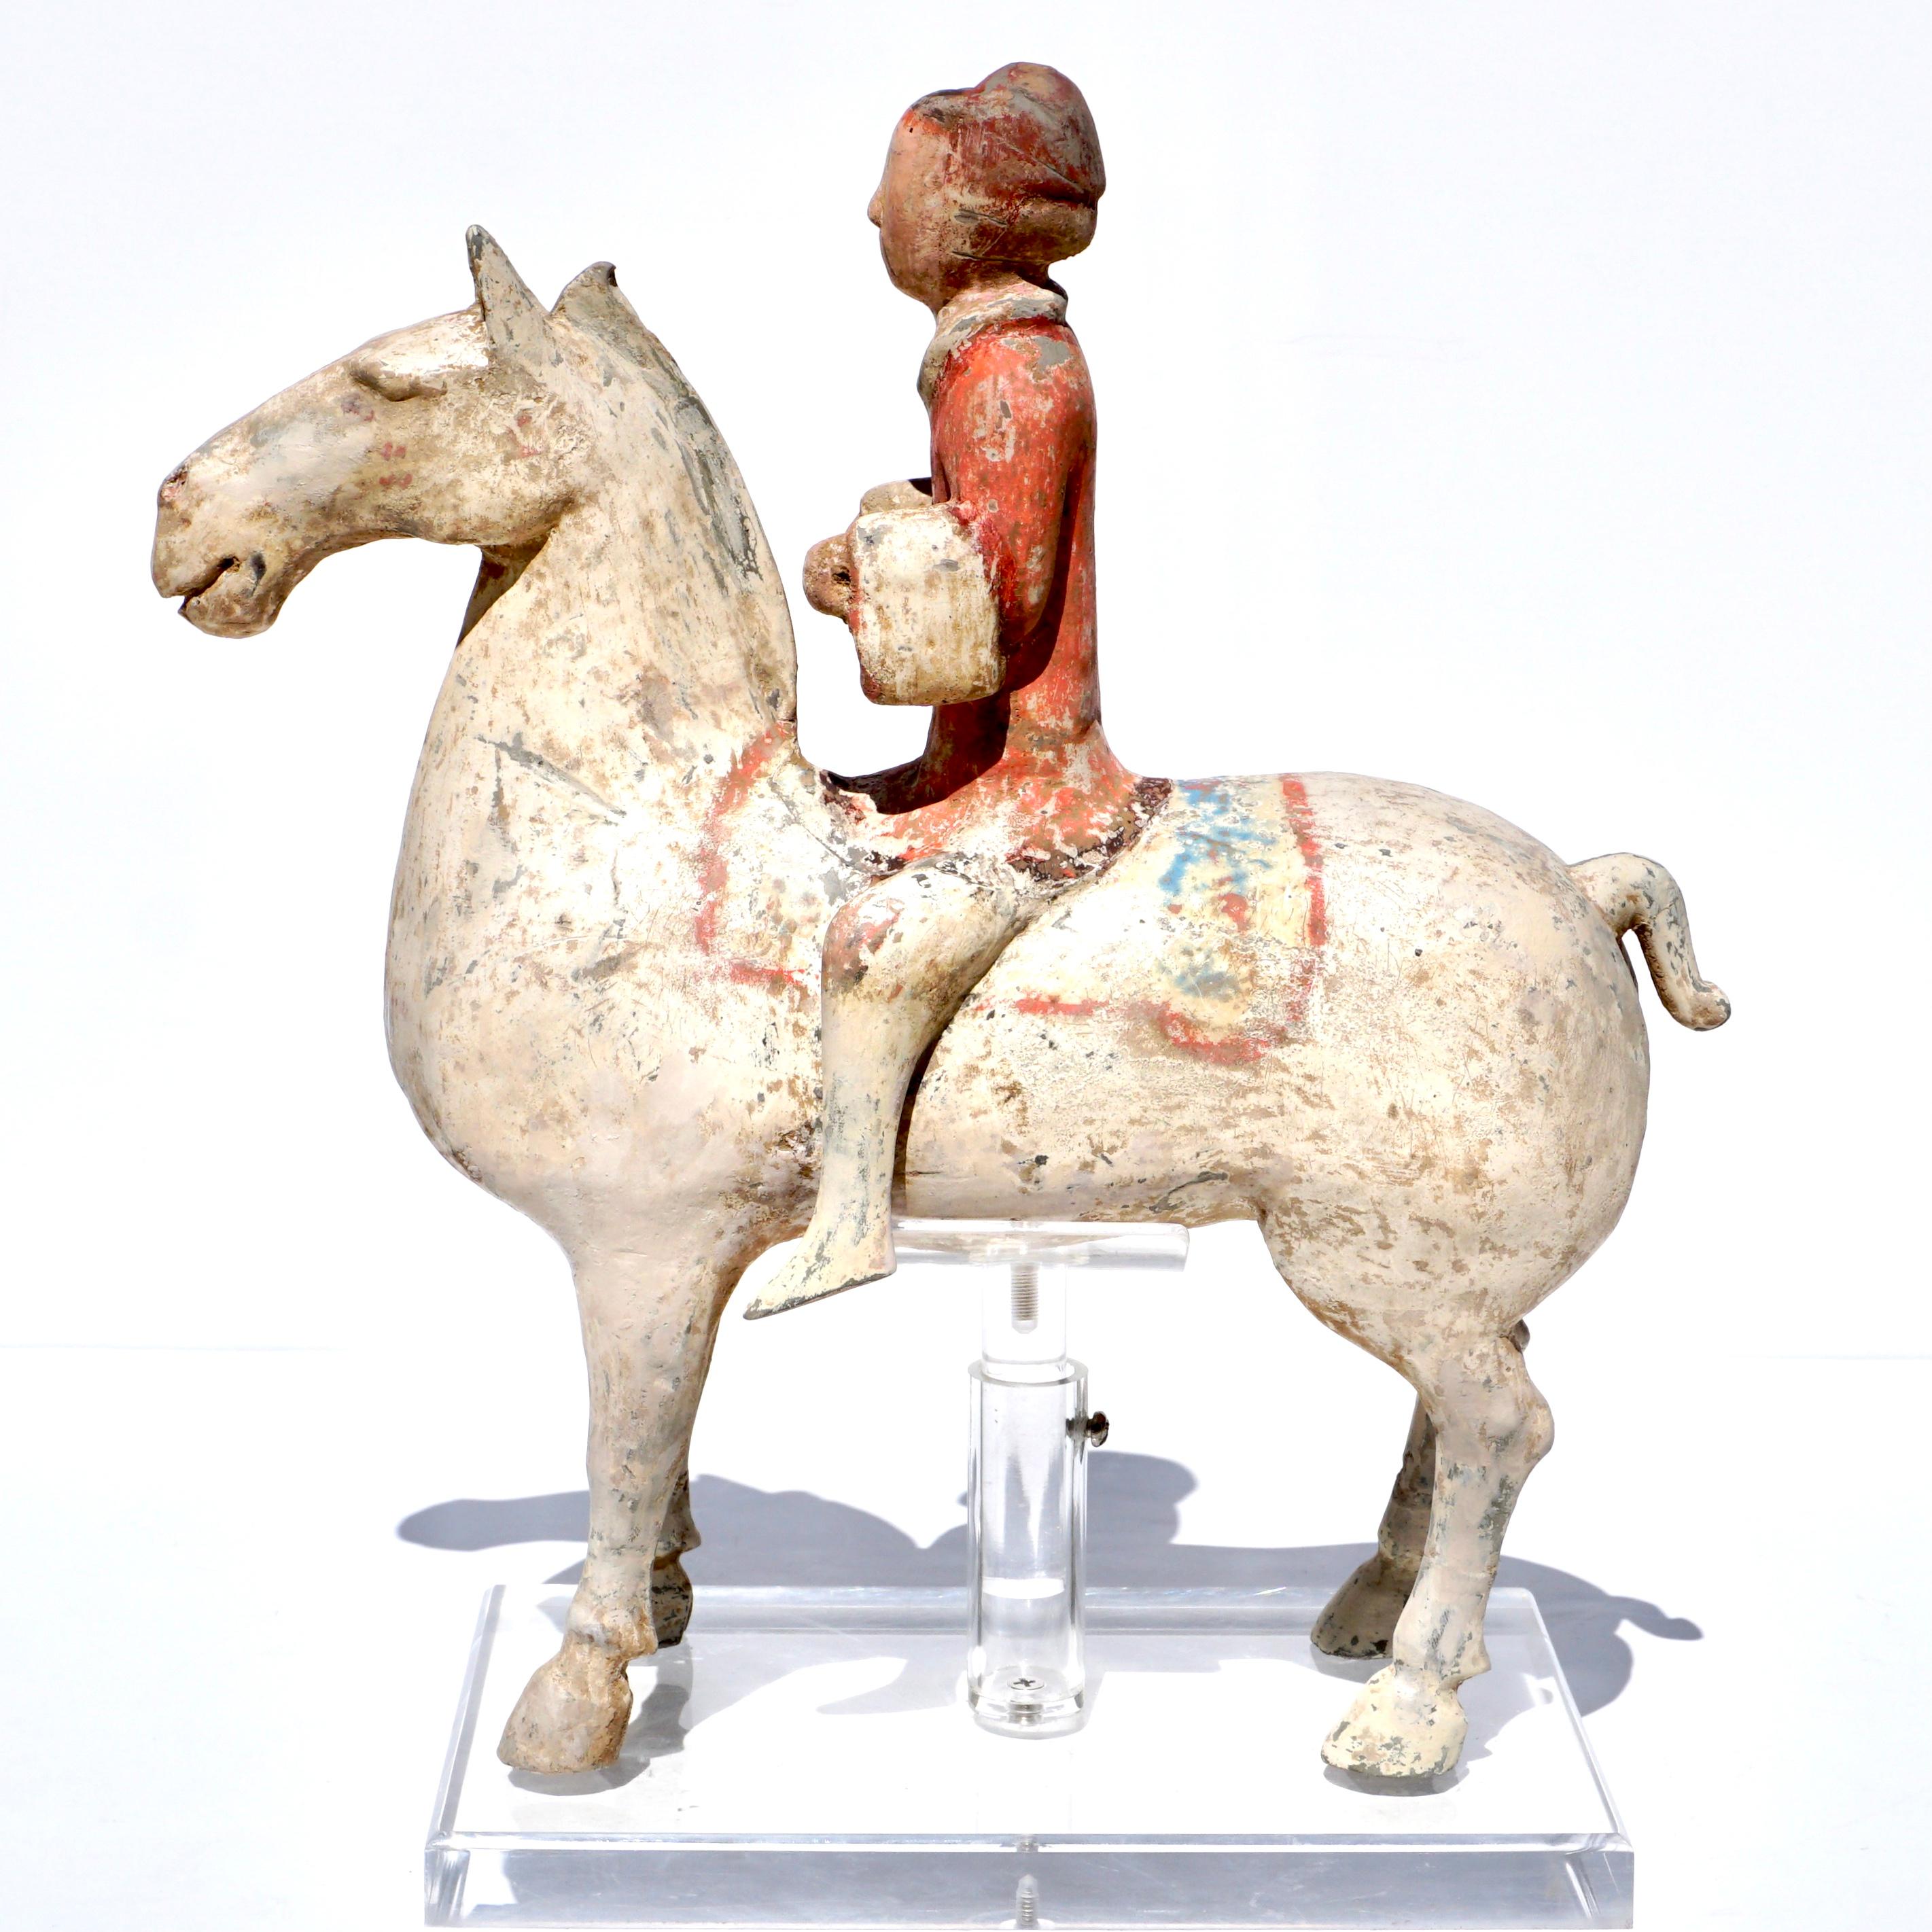 Han Dynasty painted pottery horse and rider

A Chinese Han Dynasty painted pottery horse & rider. Made from grey pottery and cold-painted in white, red and black pigments. The rider dressed as a warrior and in the pose of holding reins for the